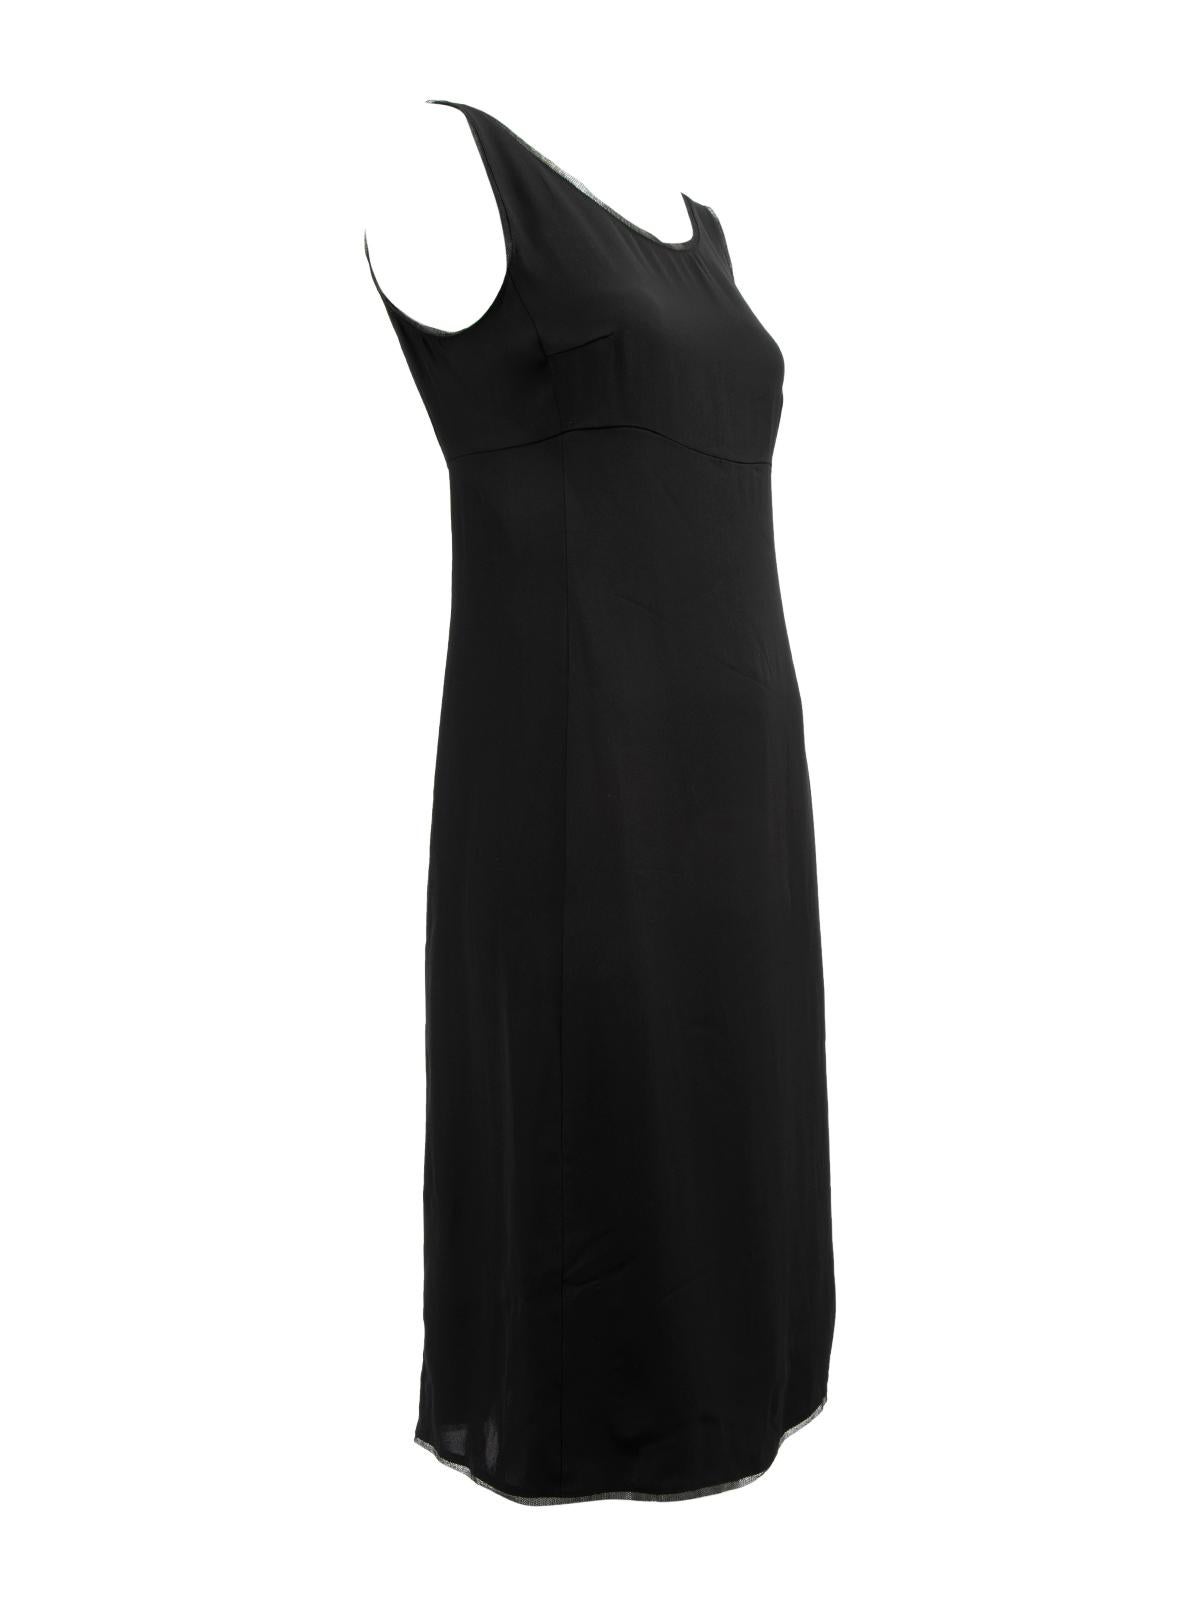 CONDITION is Very good. Hardly any visible wear to dress is evident. Loose threads to the front left of the dress can be seen on this used Prada designer resale item. Details Black Synthetic Midi dress Slip dress Sleeveless Round neckline Zip on